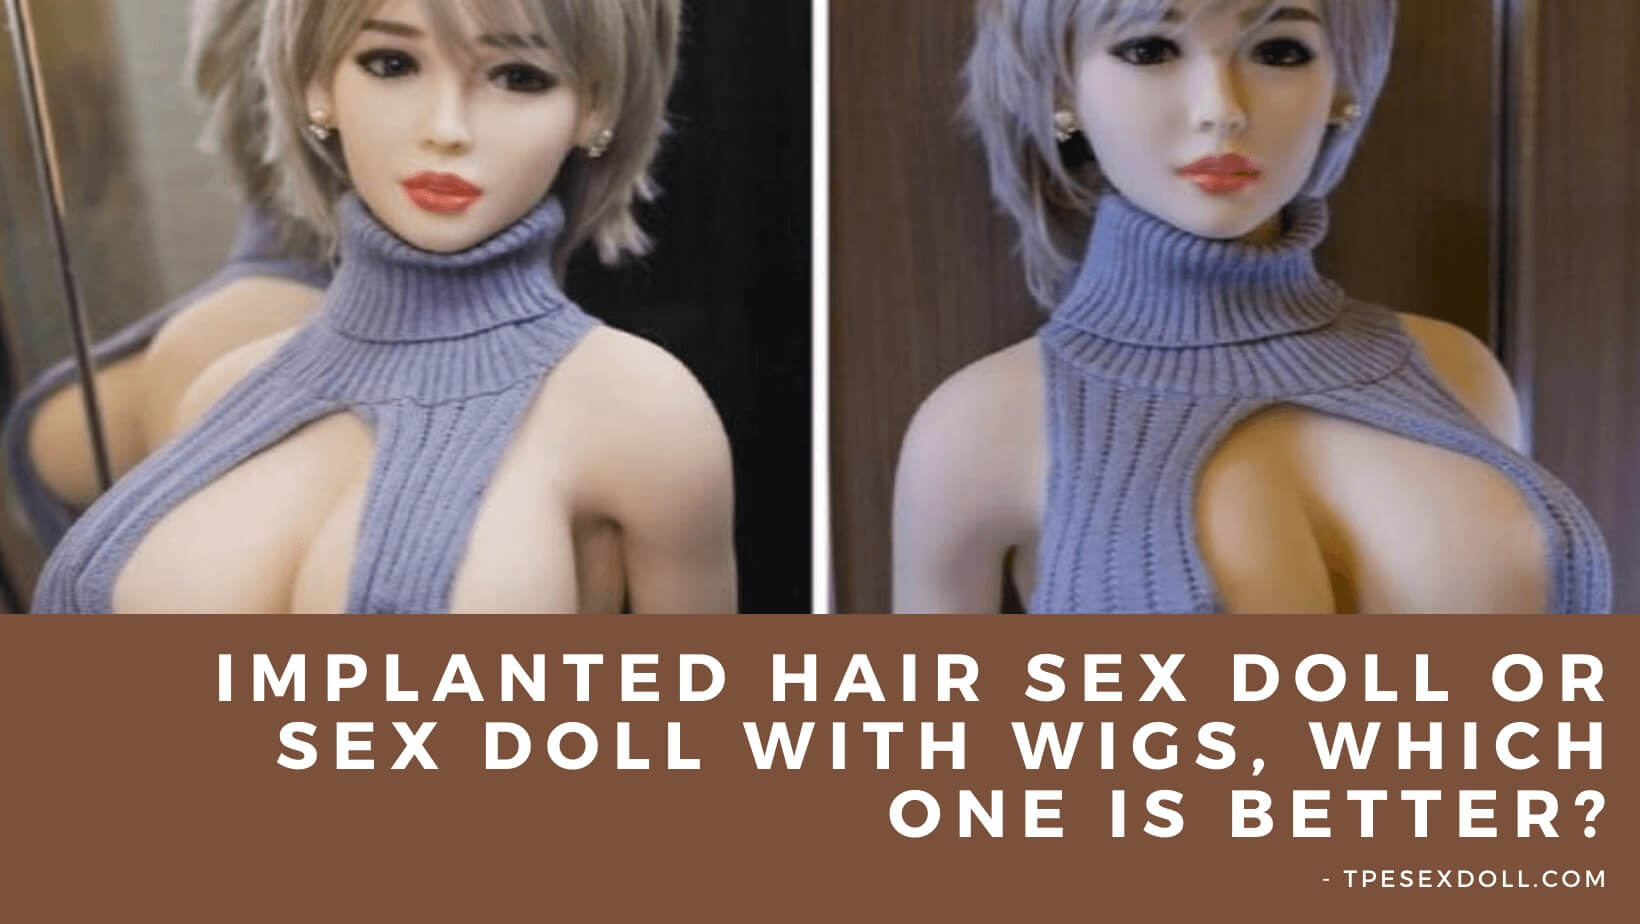 Implanted hair sex doll or sex doll with wigs, which one is better?